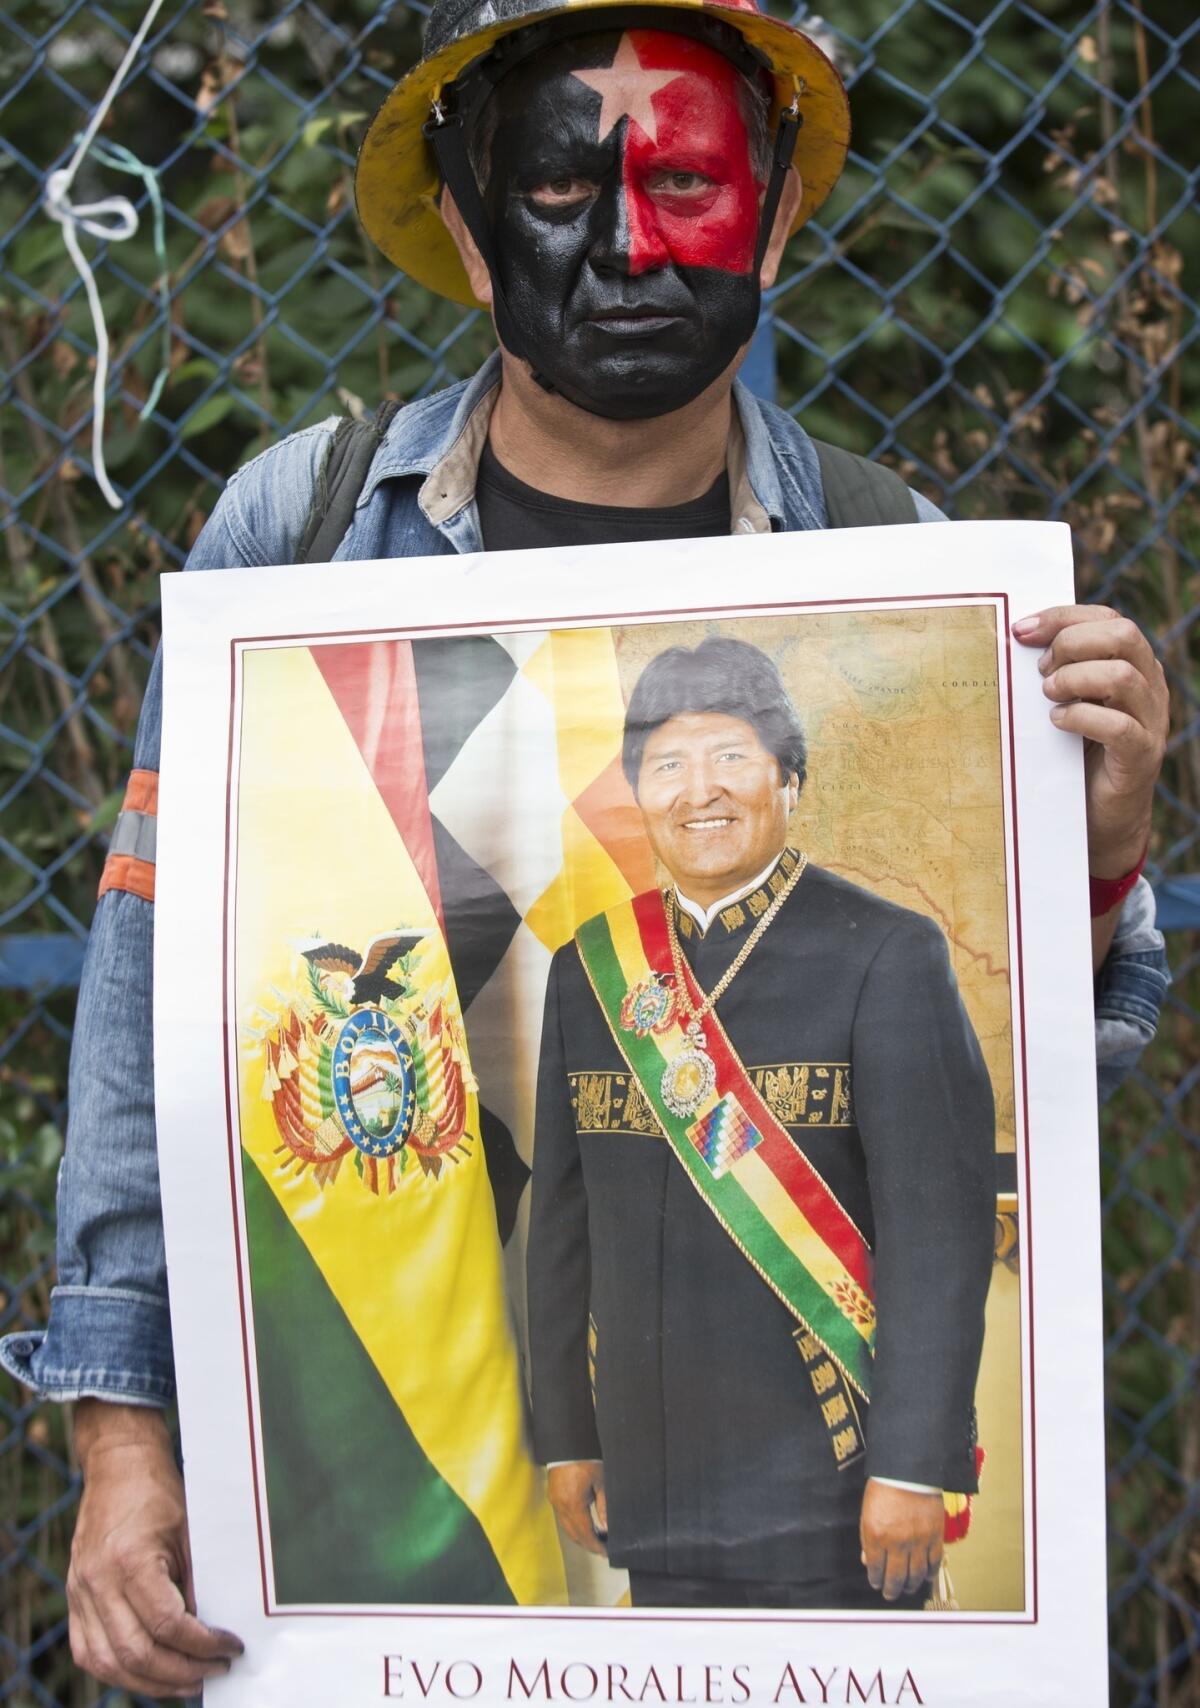 A man shows a poster of Bolivian President Evo Morales during a protest in support of the Bolivian leader in front of the U.S. Embassy in Mexico City on July 4. Many Latin Americans were angered after some European nations temporarily refused Morales' plane access to their airspace amid suspicions U.S. fugitive Edward Snowden was aboard.